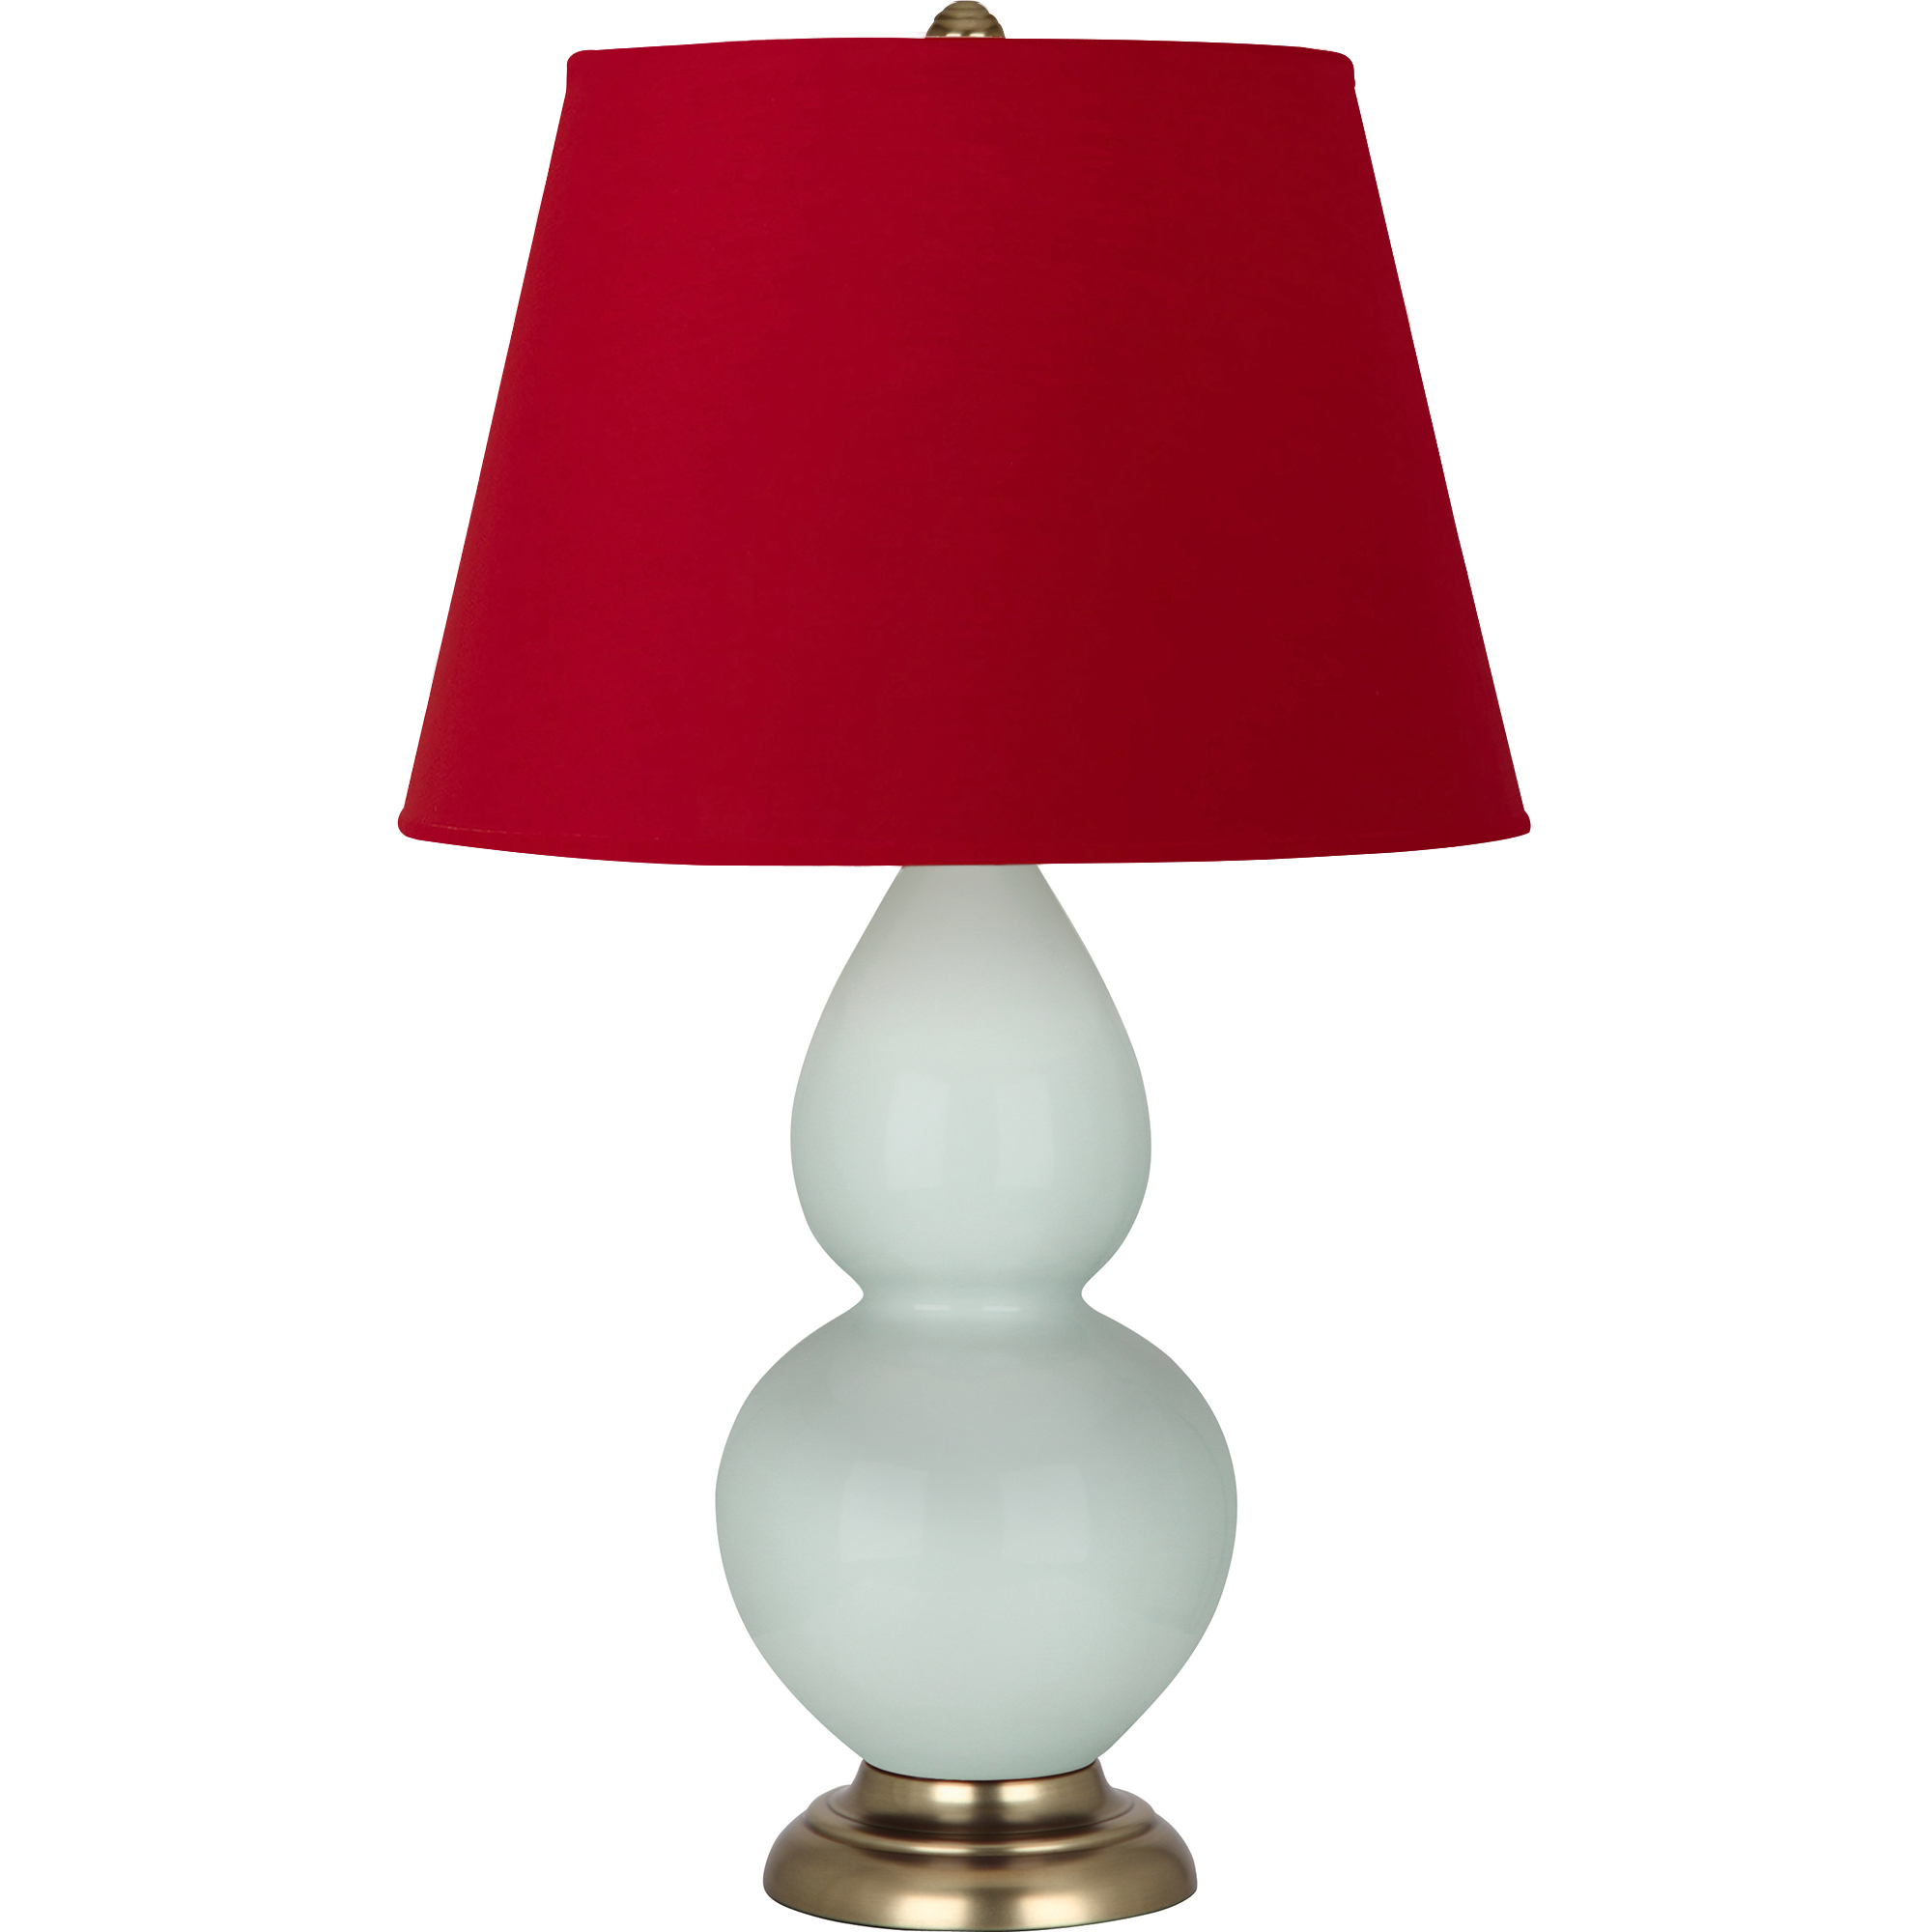 Double Gourd Table Lamp Style #1789R